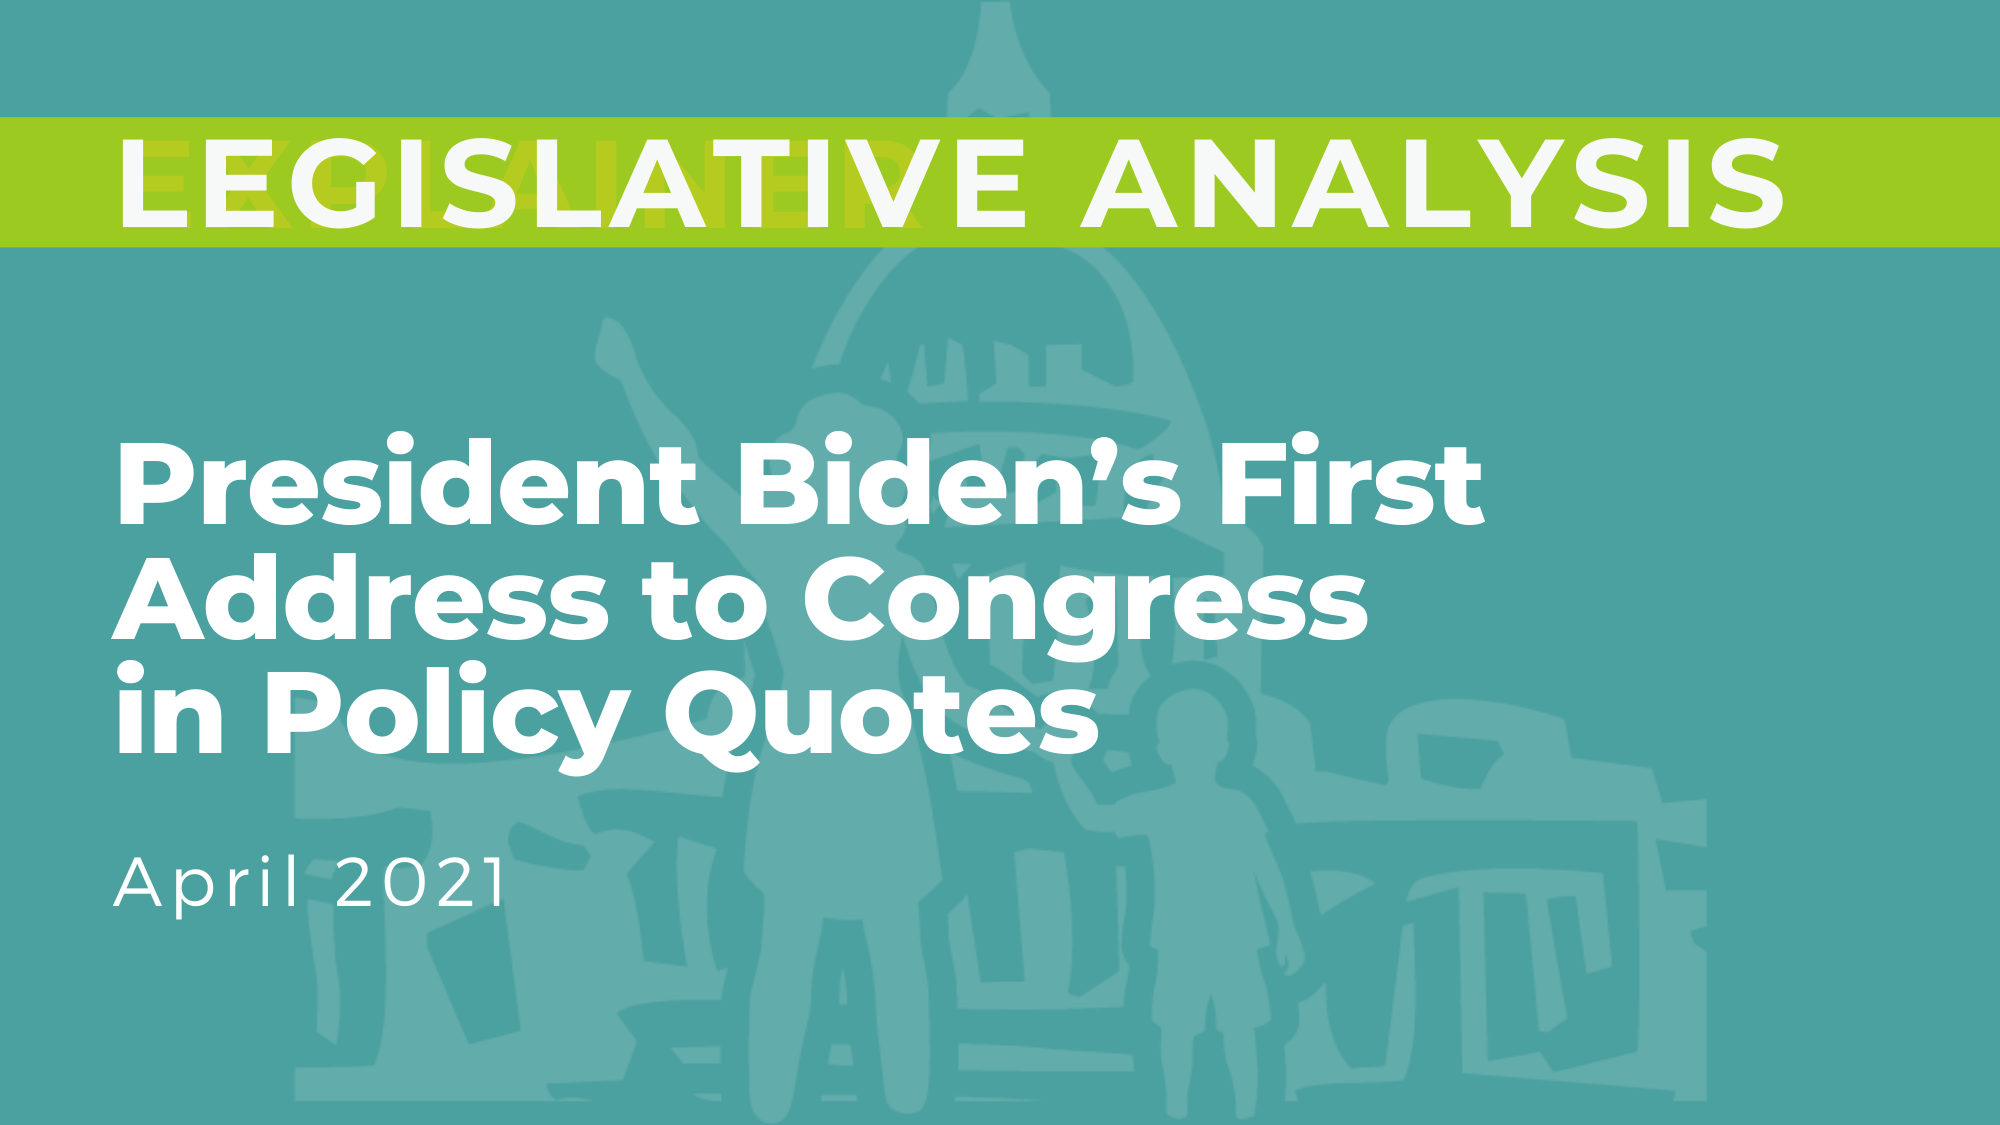 President Biden's First Address to Congress in Policy Quotes